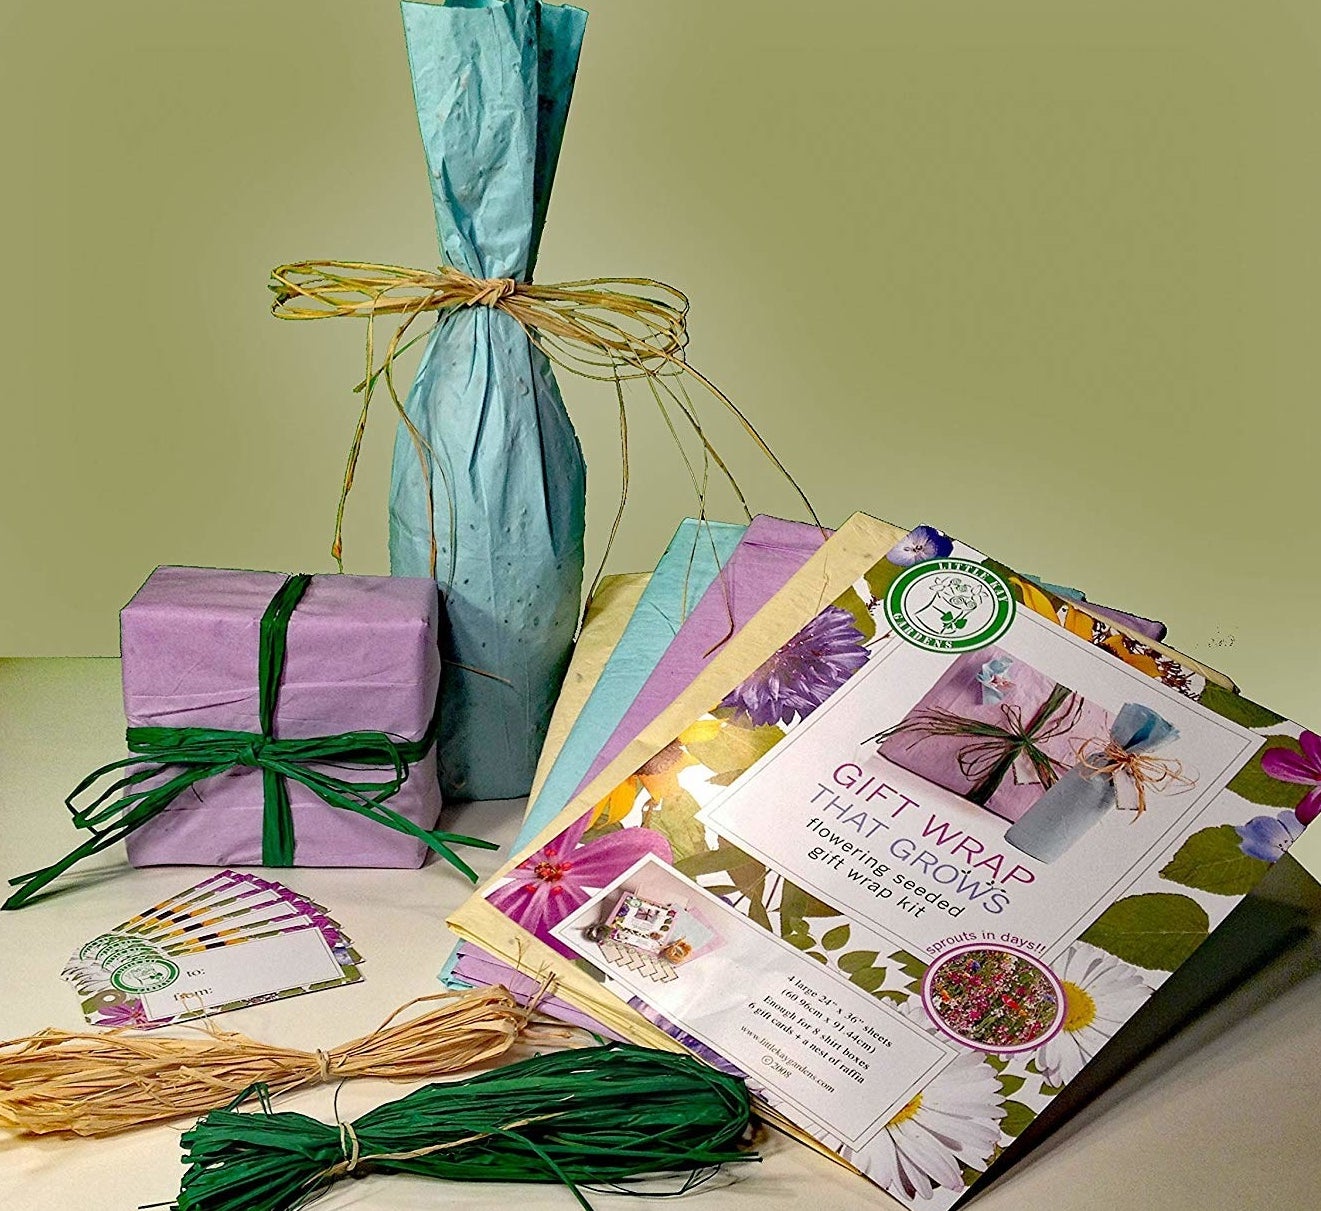 The gift wrap set with sheets in purple, yellow, and green as well as raffia in yellow and green